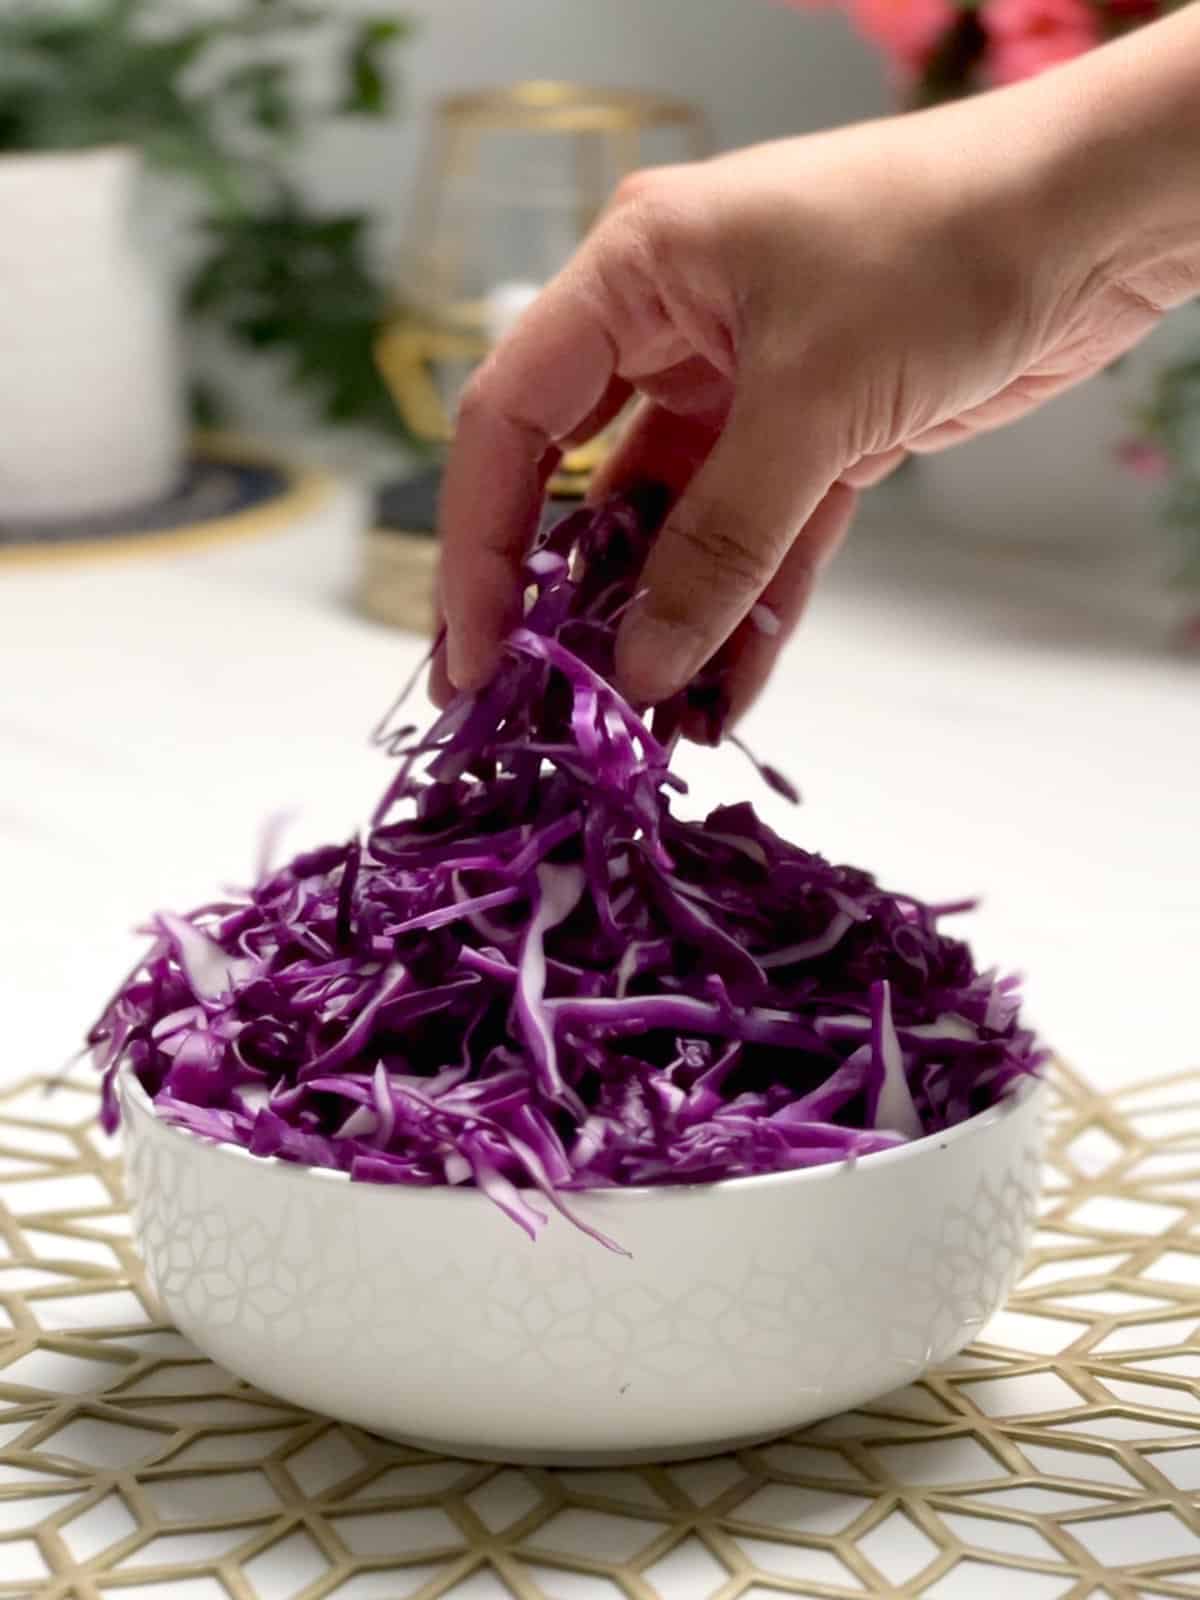 a hand picking up some shredded cabbage from a bowl